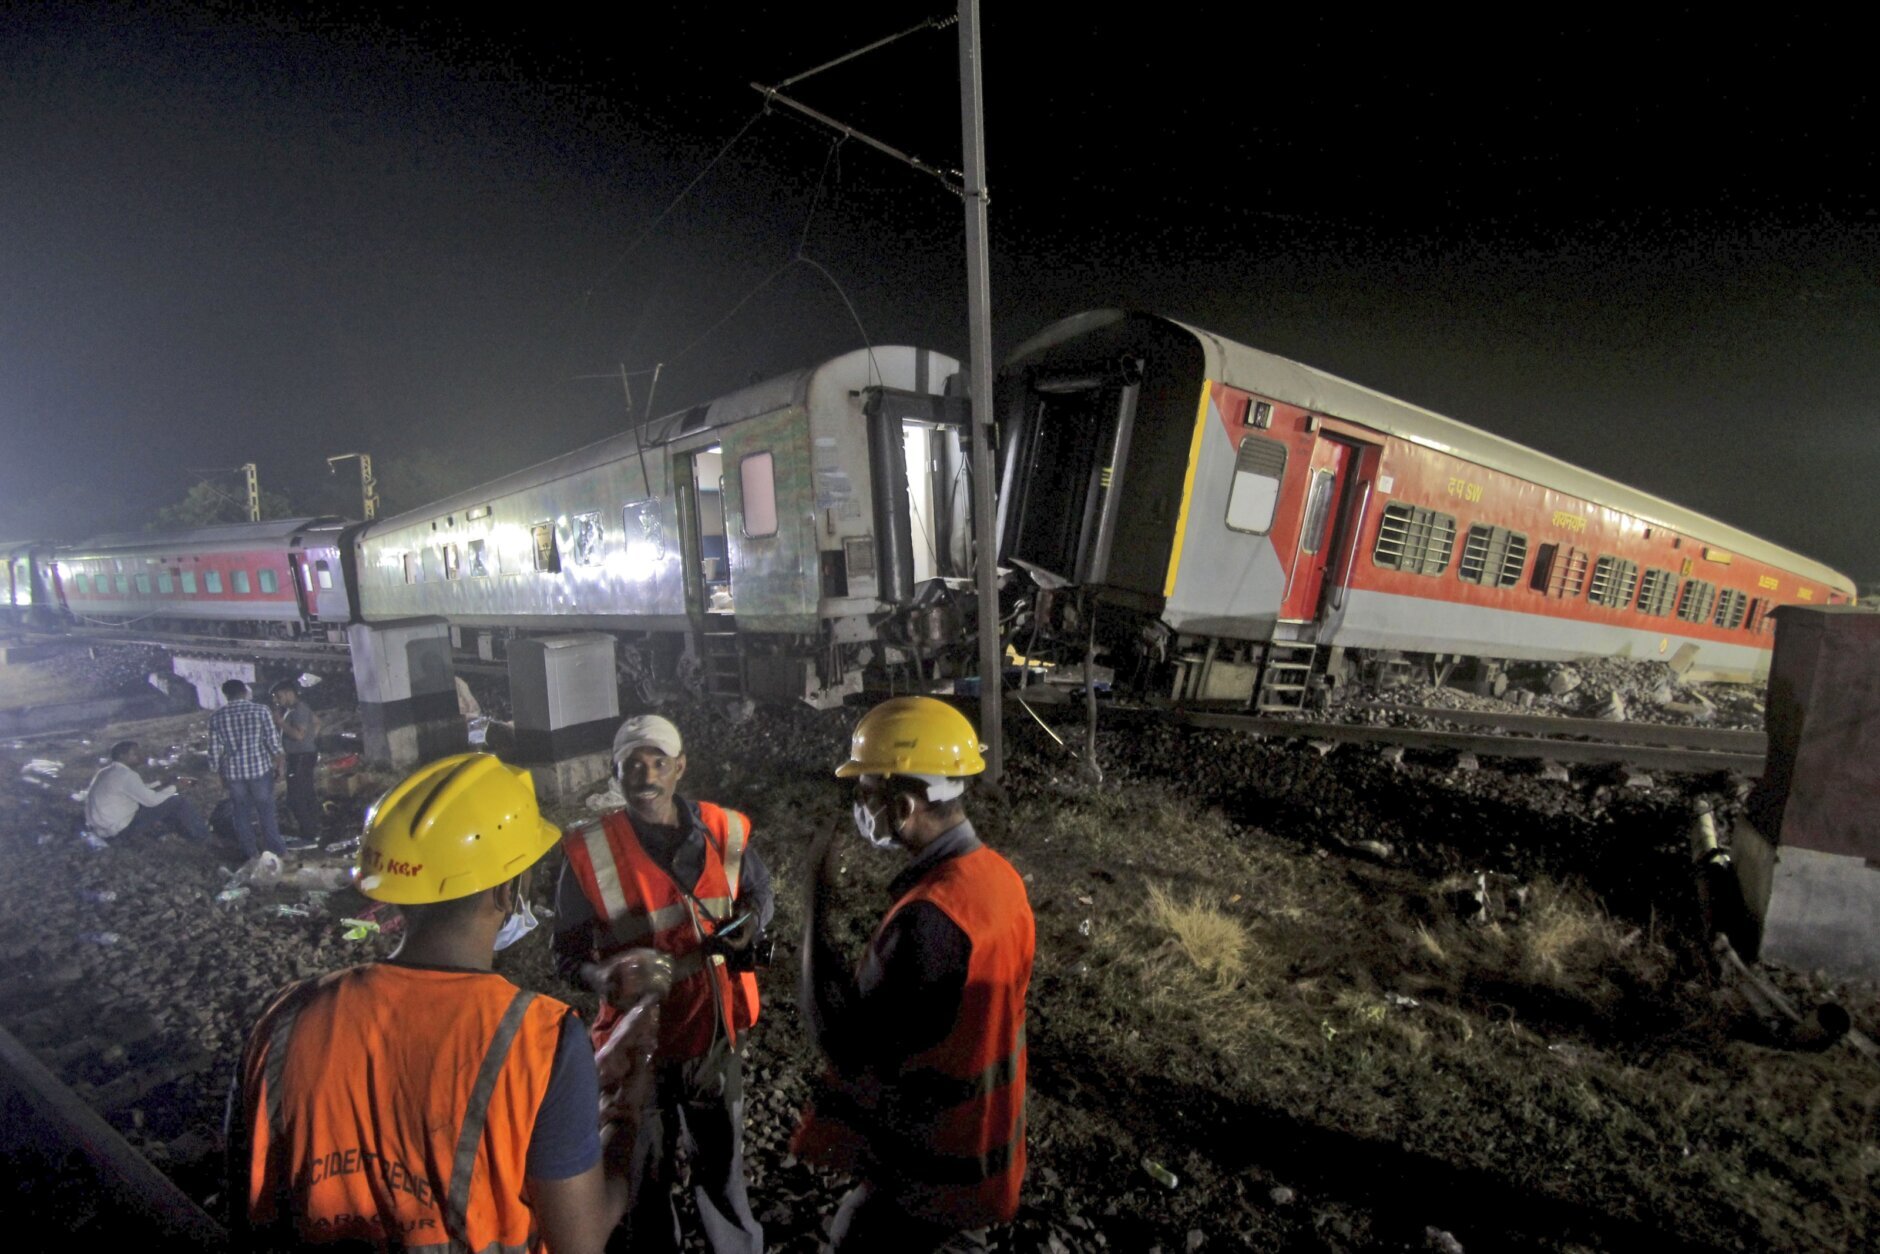 Death Toll In India Train Crash Hits 230, Over 900 Injured